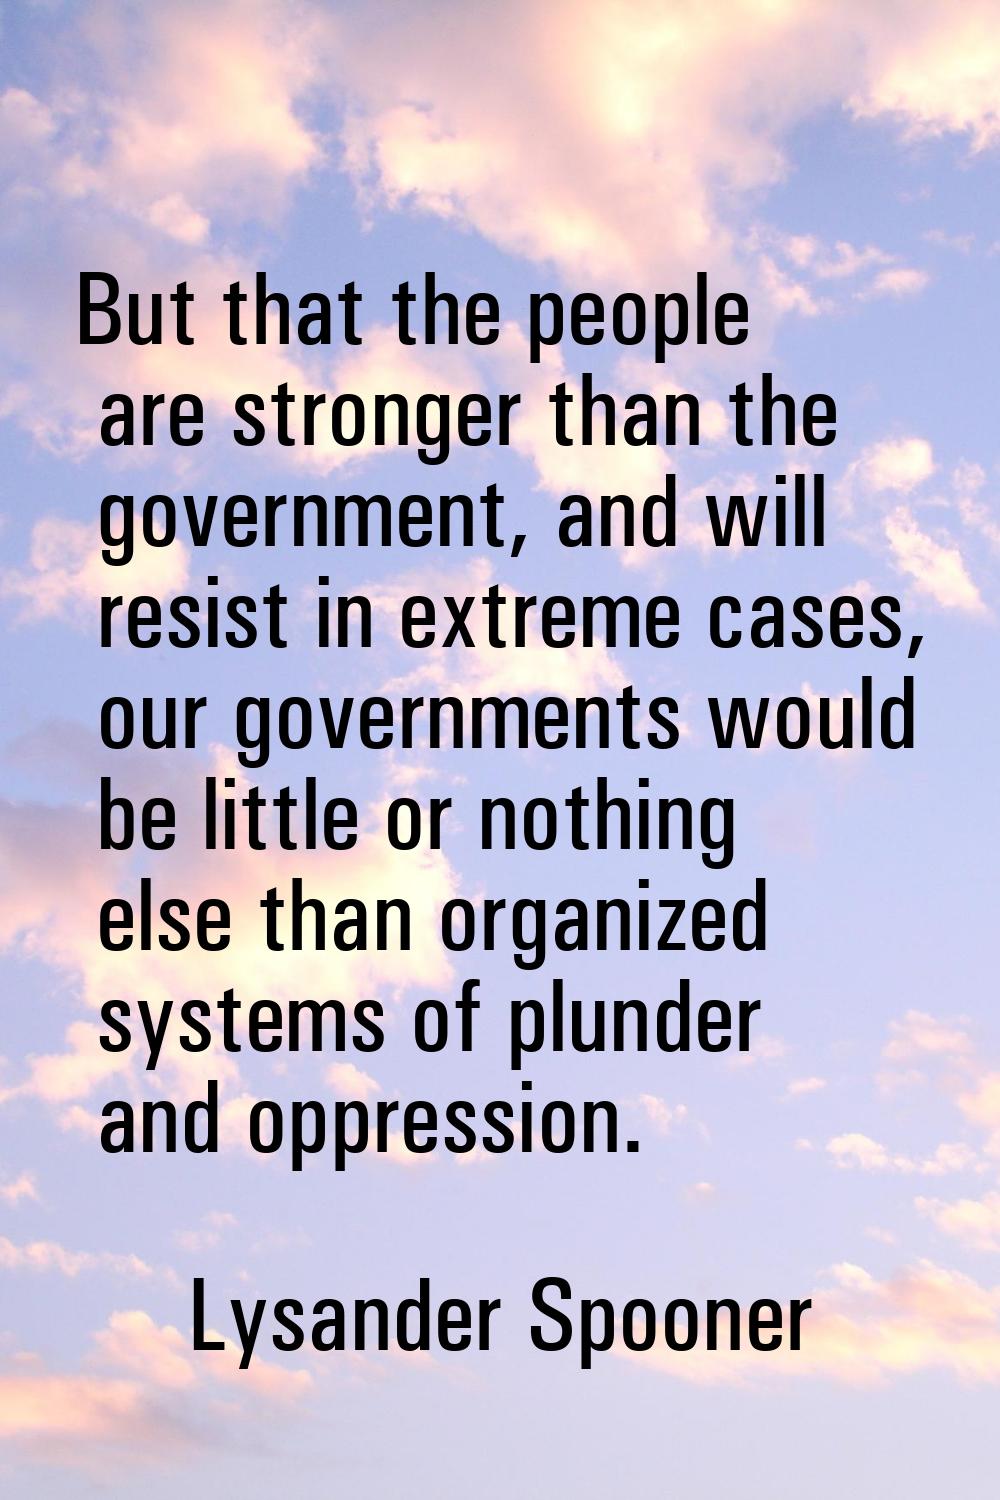 But that the people are stronger than the government, and will resist in extreme cases, our governm